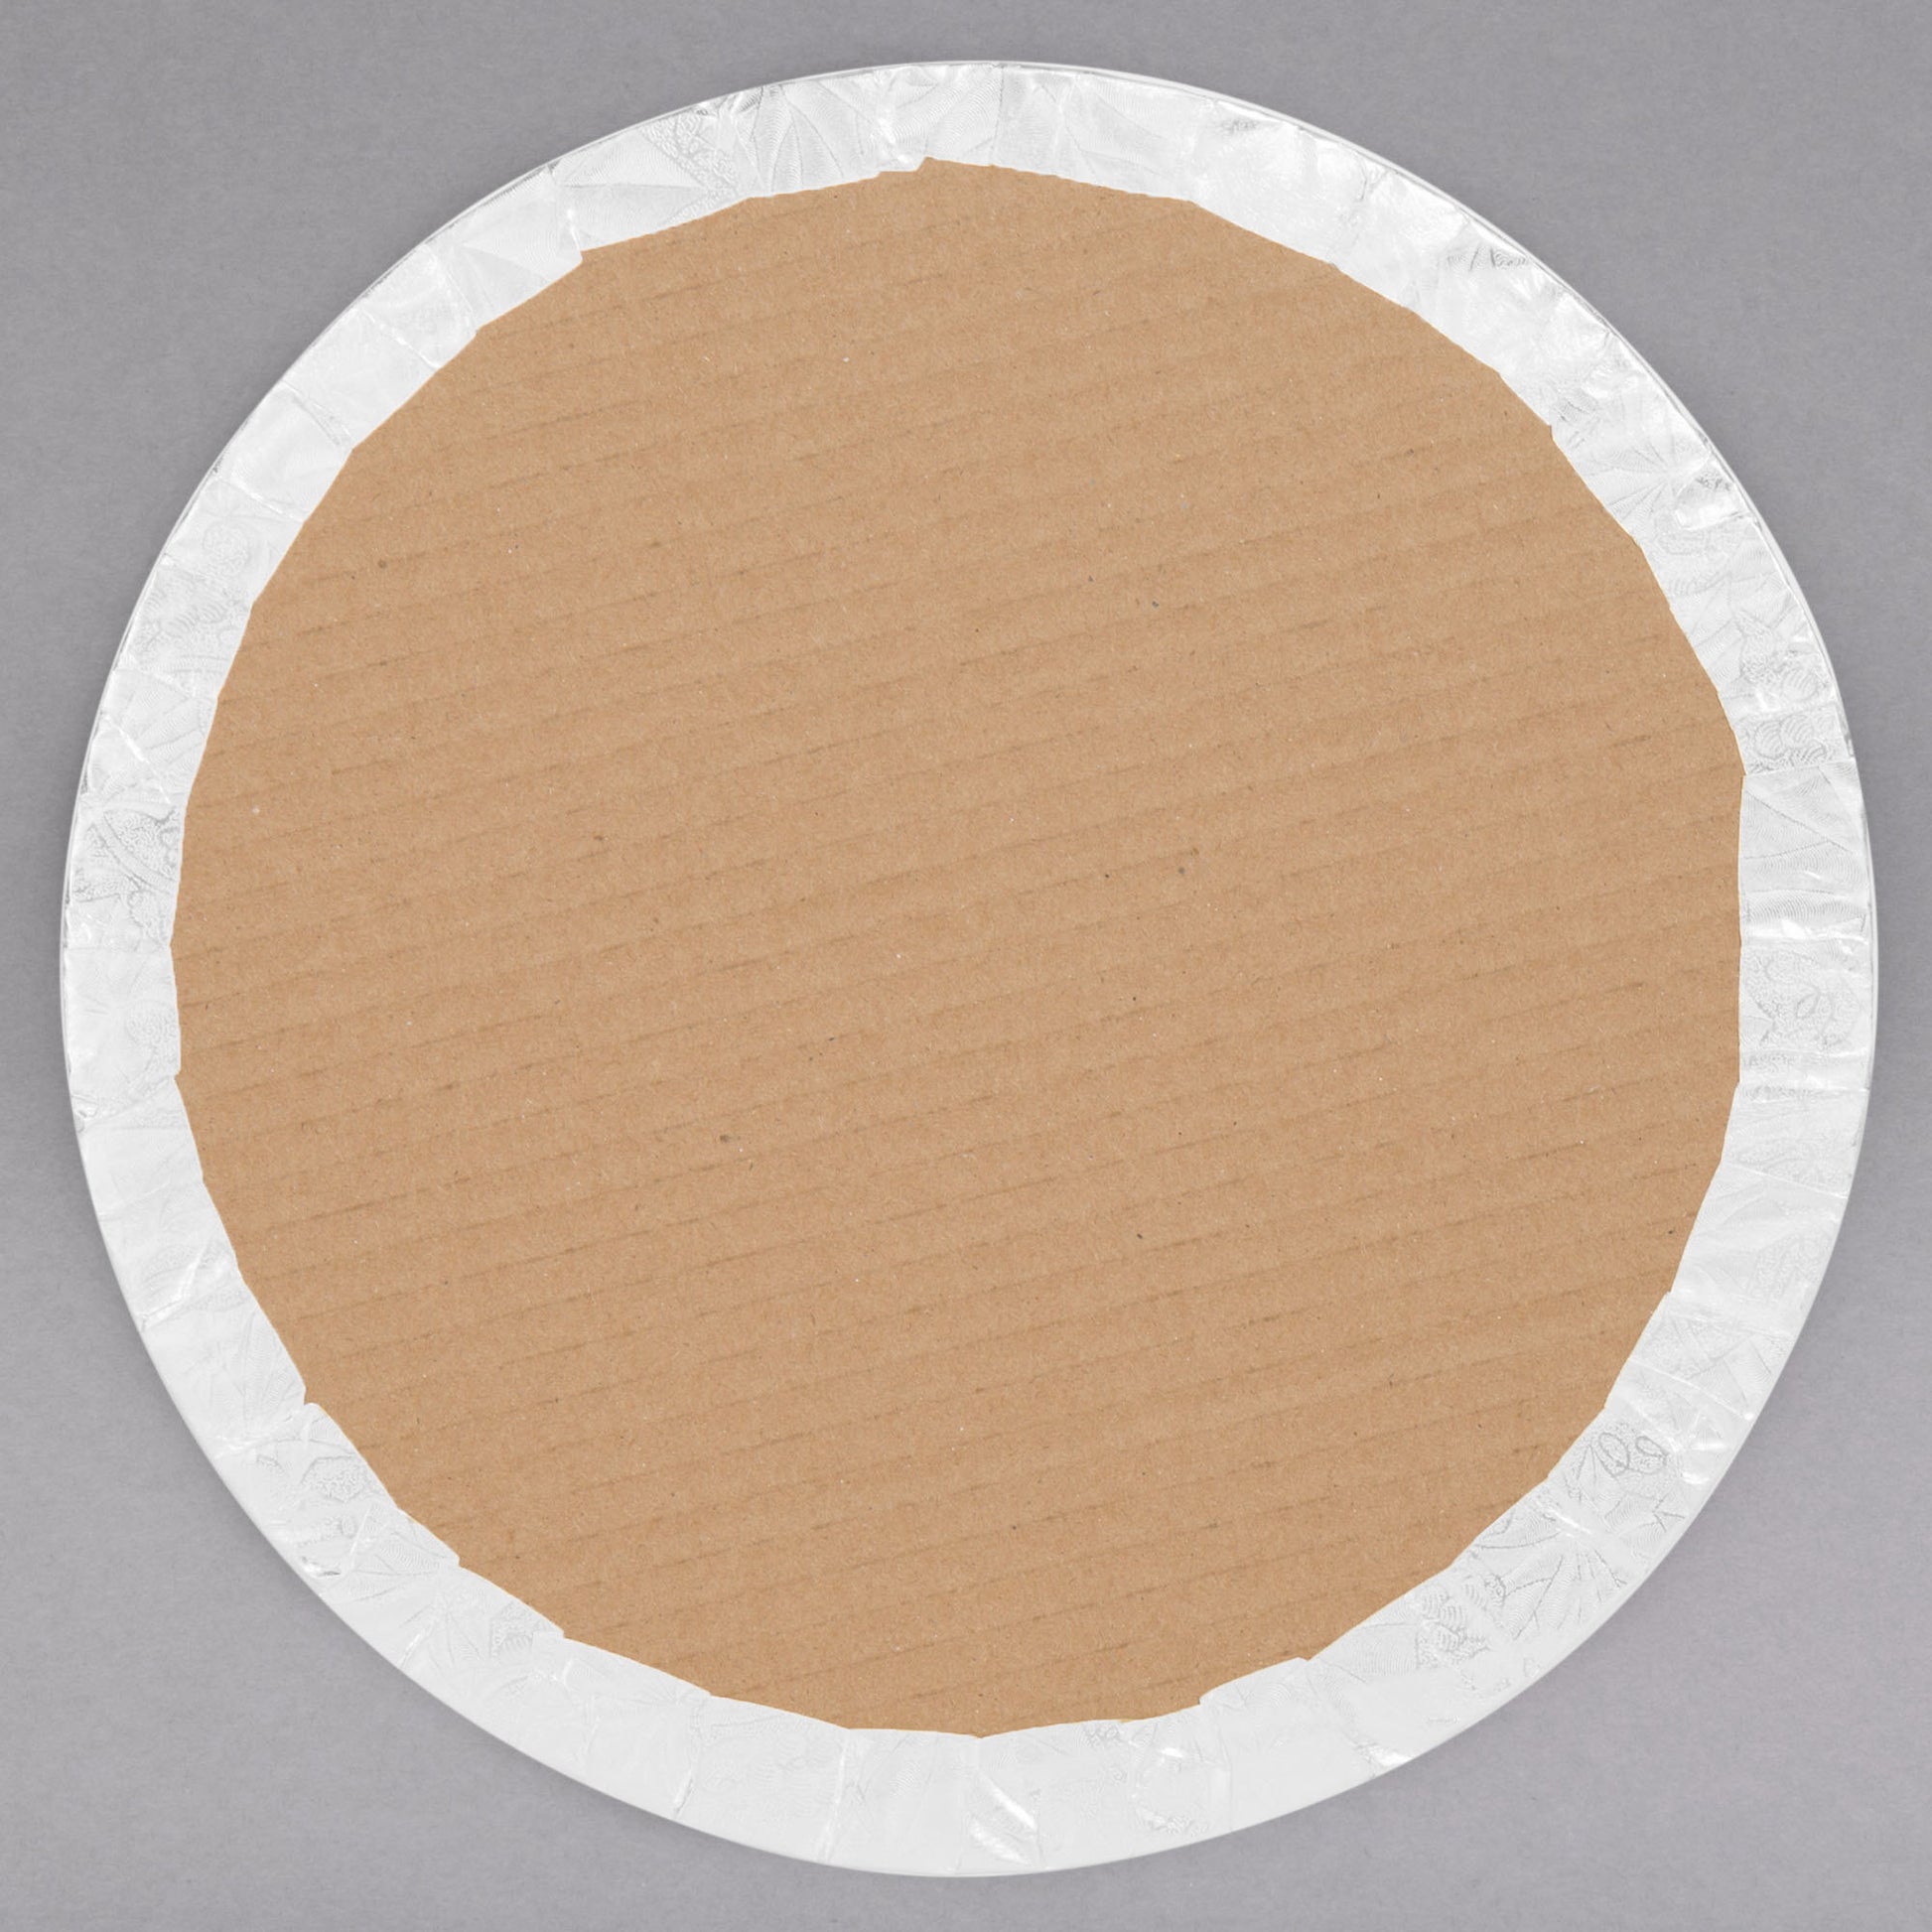 image of the back of a 12 inch white round cake drum that is a qtr inch thick